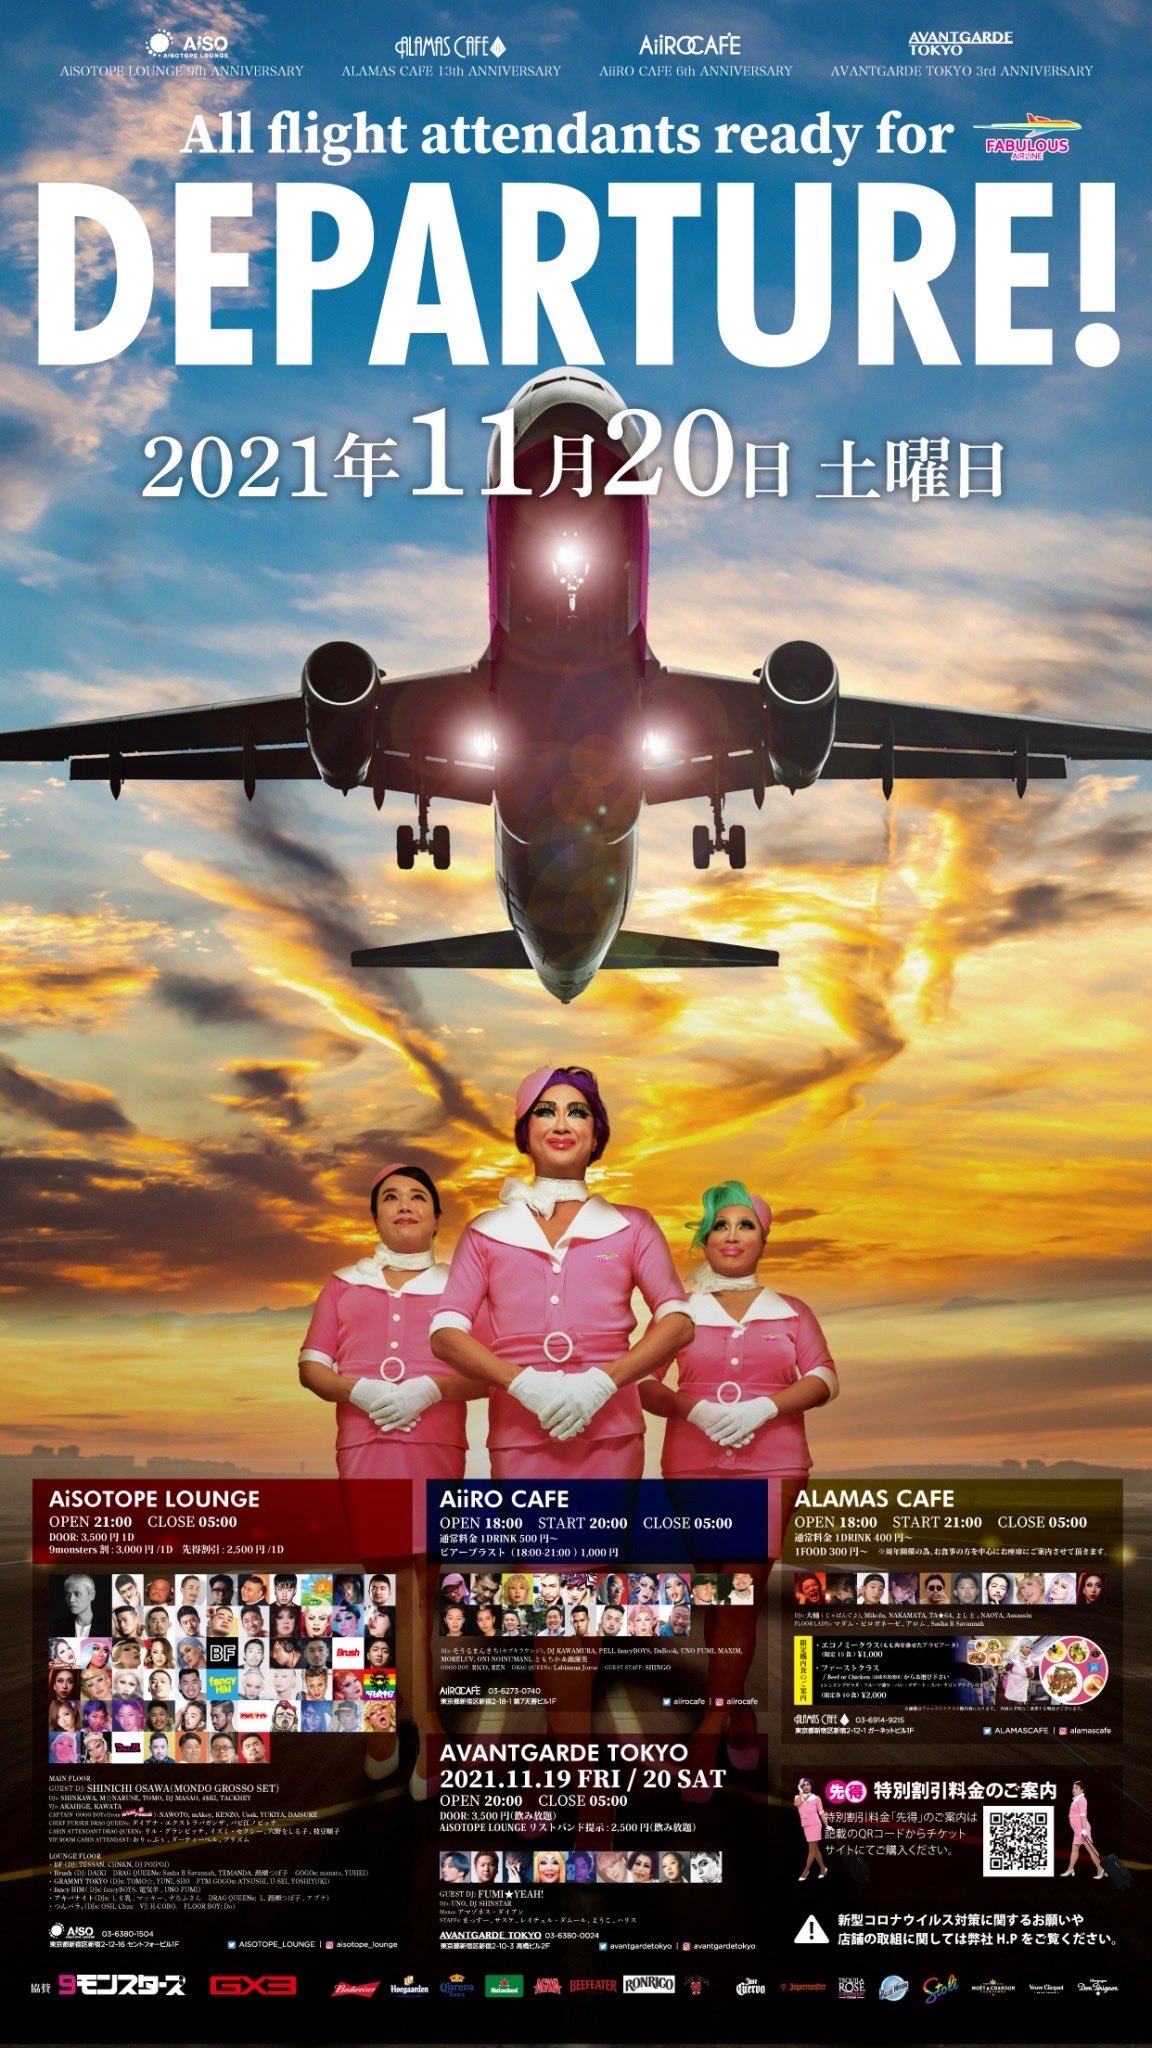 AiSOTOPE LOUNGE 9th ANNIVERSARY「DEPARTURE!」-FABULOUS AIRLINE-